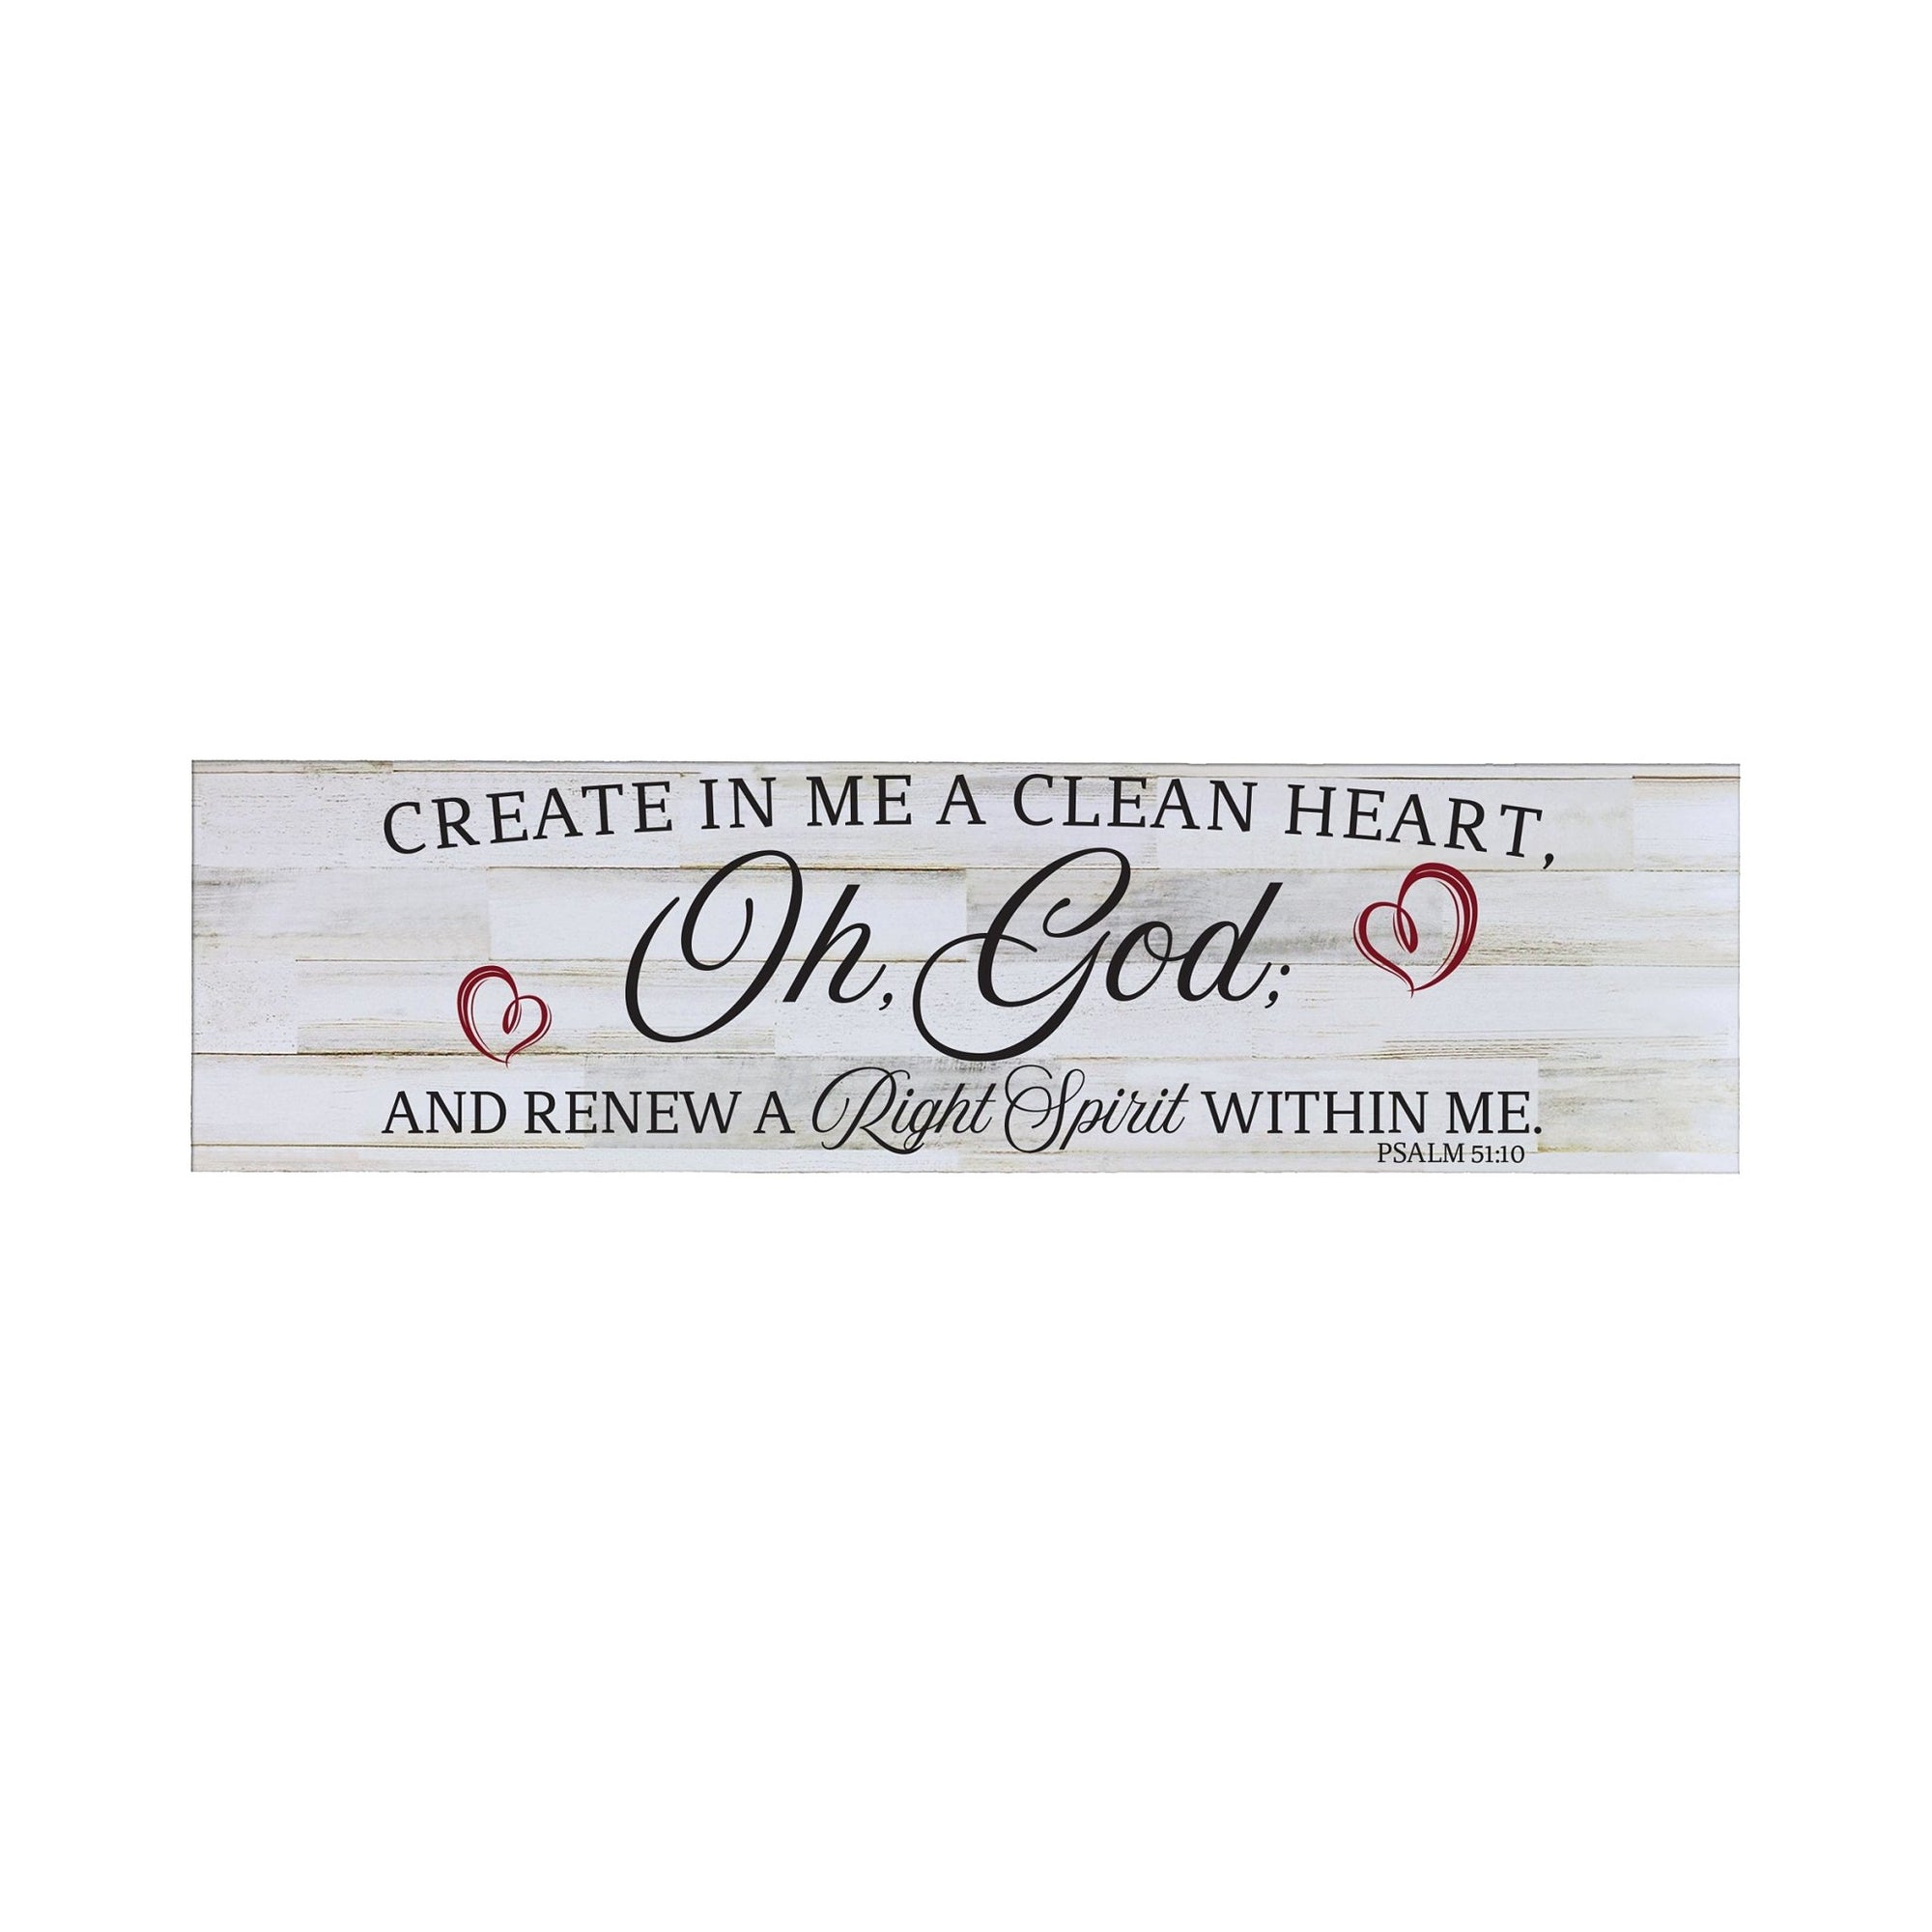 Inspirational Modern Wooden Wall Hanging Plaque 10x40 - Create In Me - LifeSong Milestones